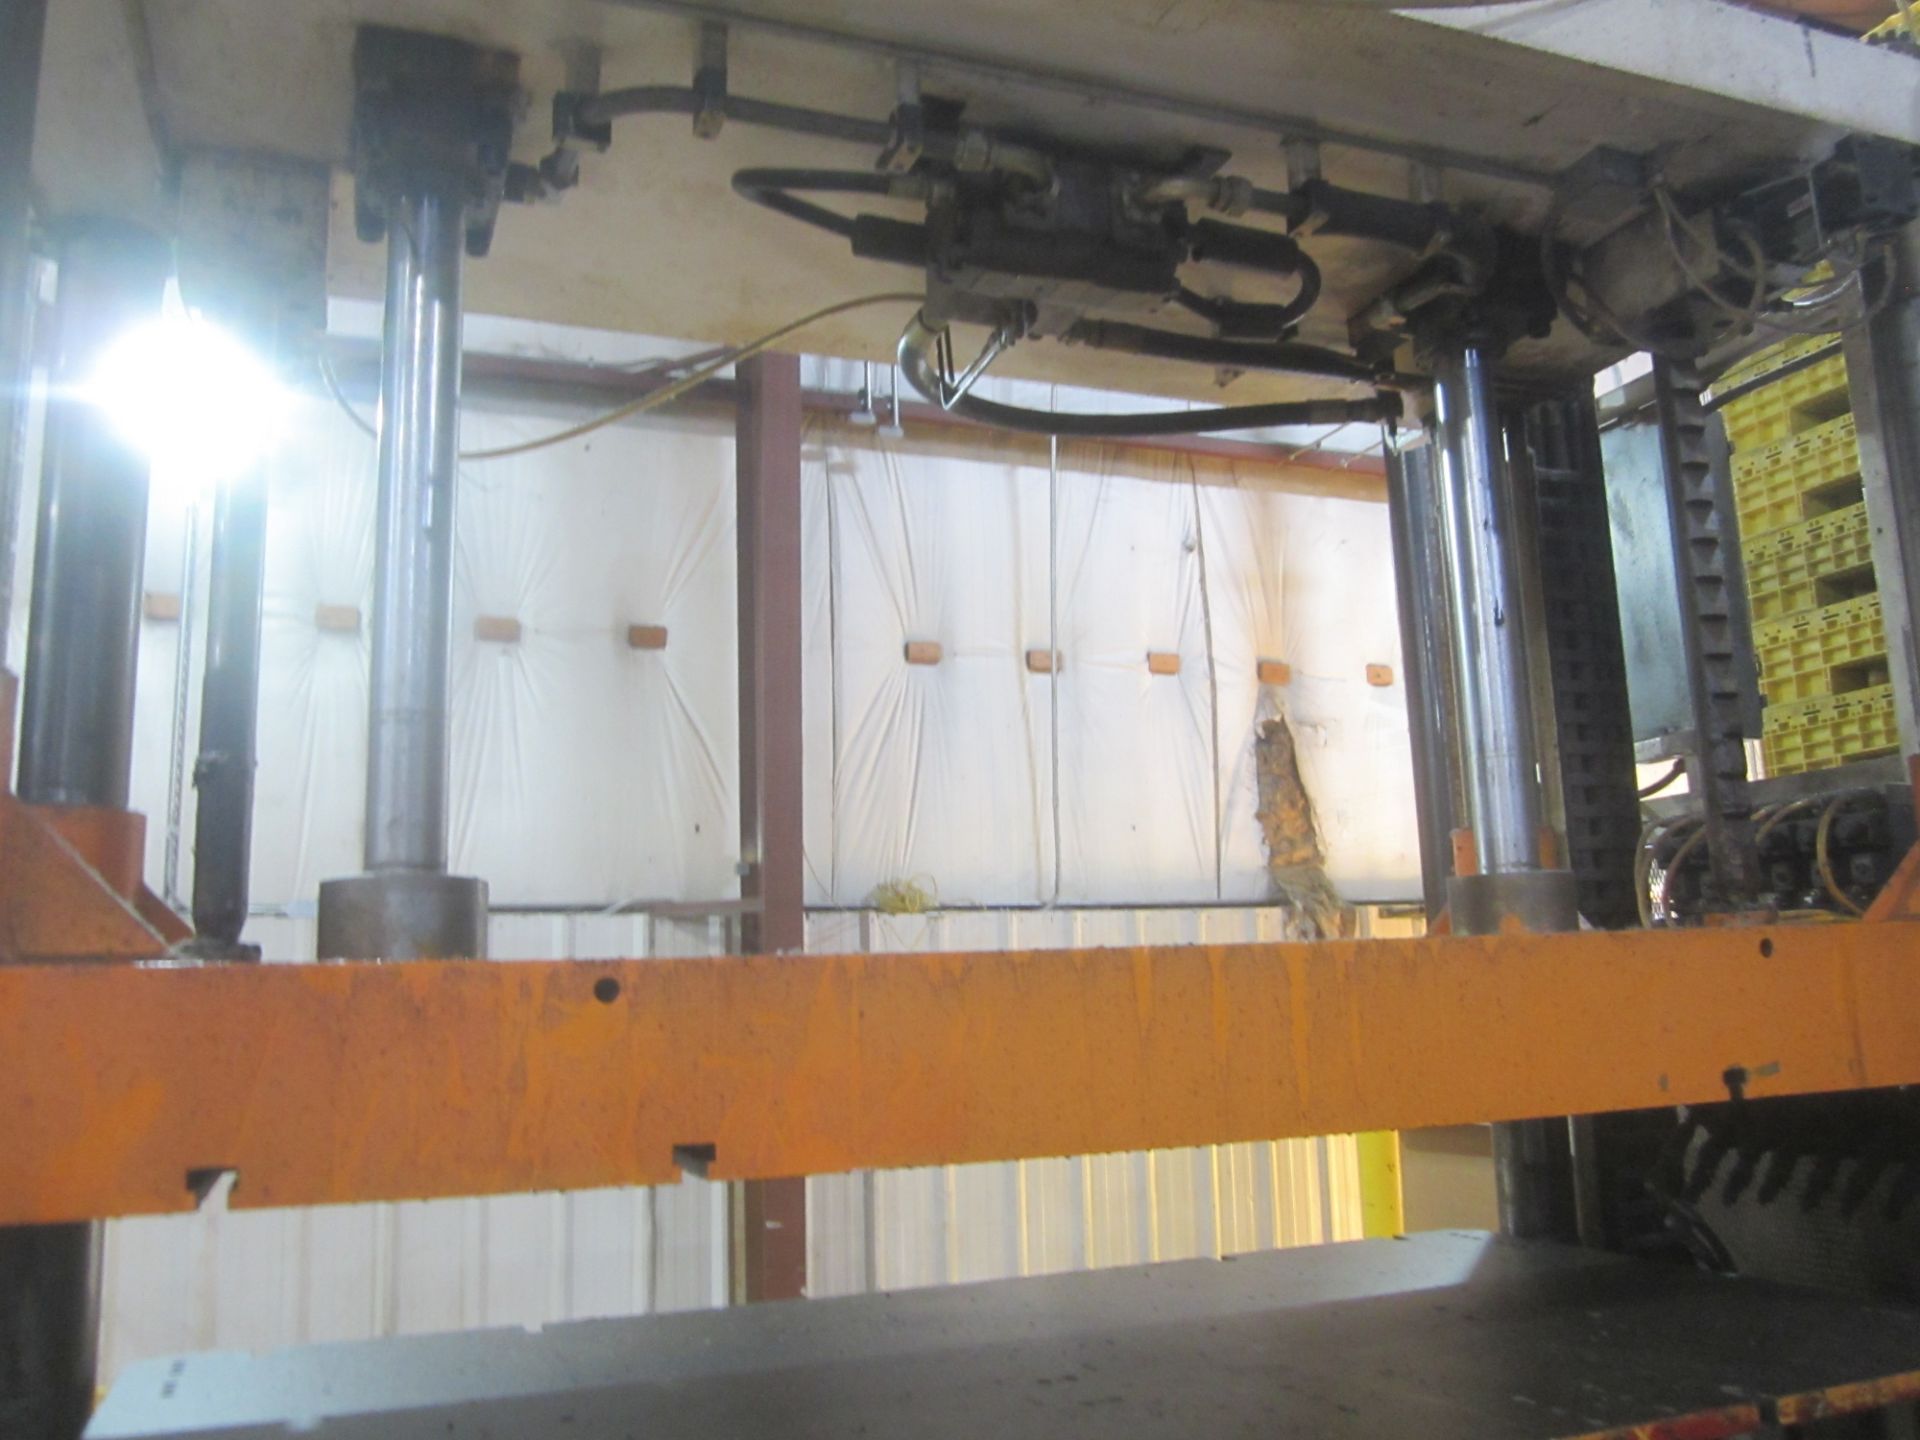 Lawton Hydraulic Trim Press, 100 Ton, s/n 1002065, 48" X 113" Bed Plate, 37" F to B Between Posts, - Image 5 of 7